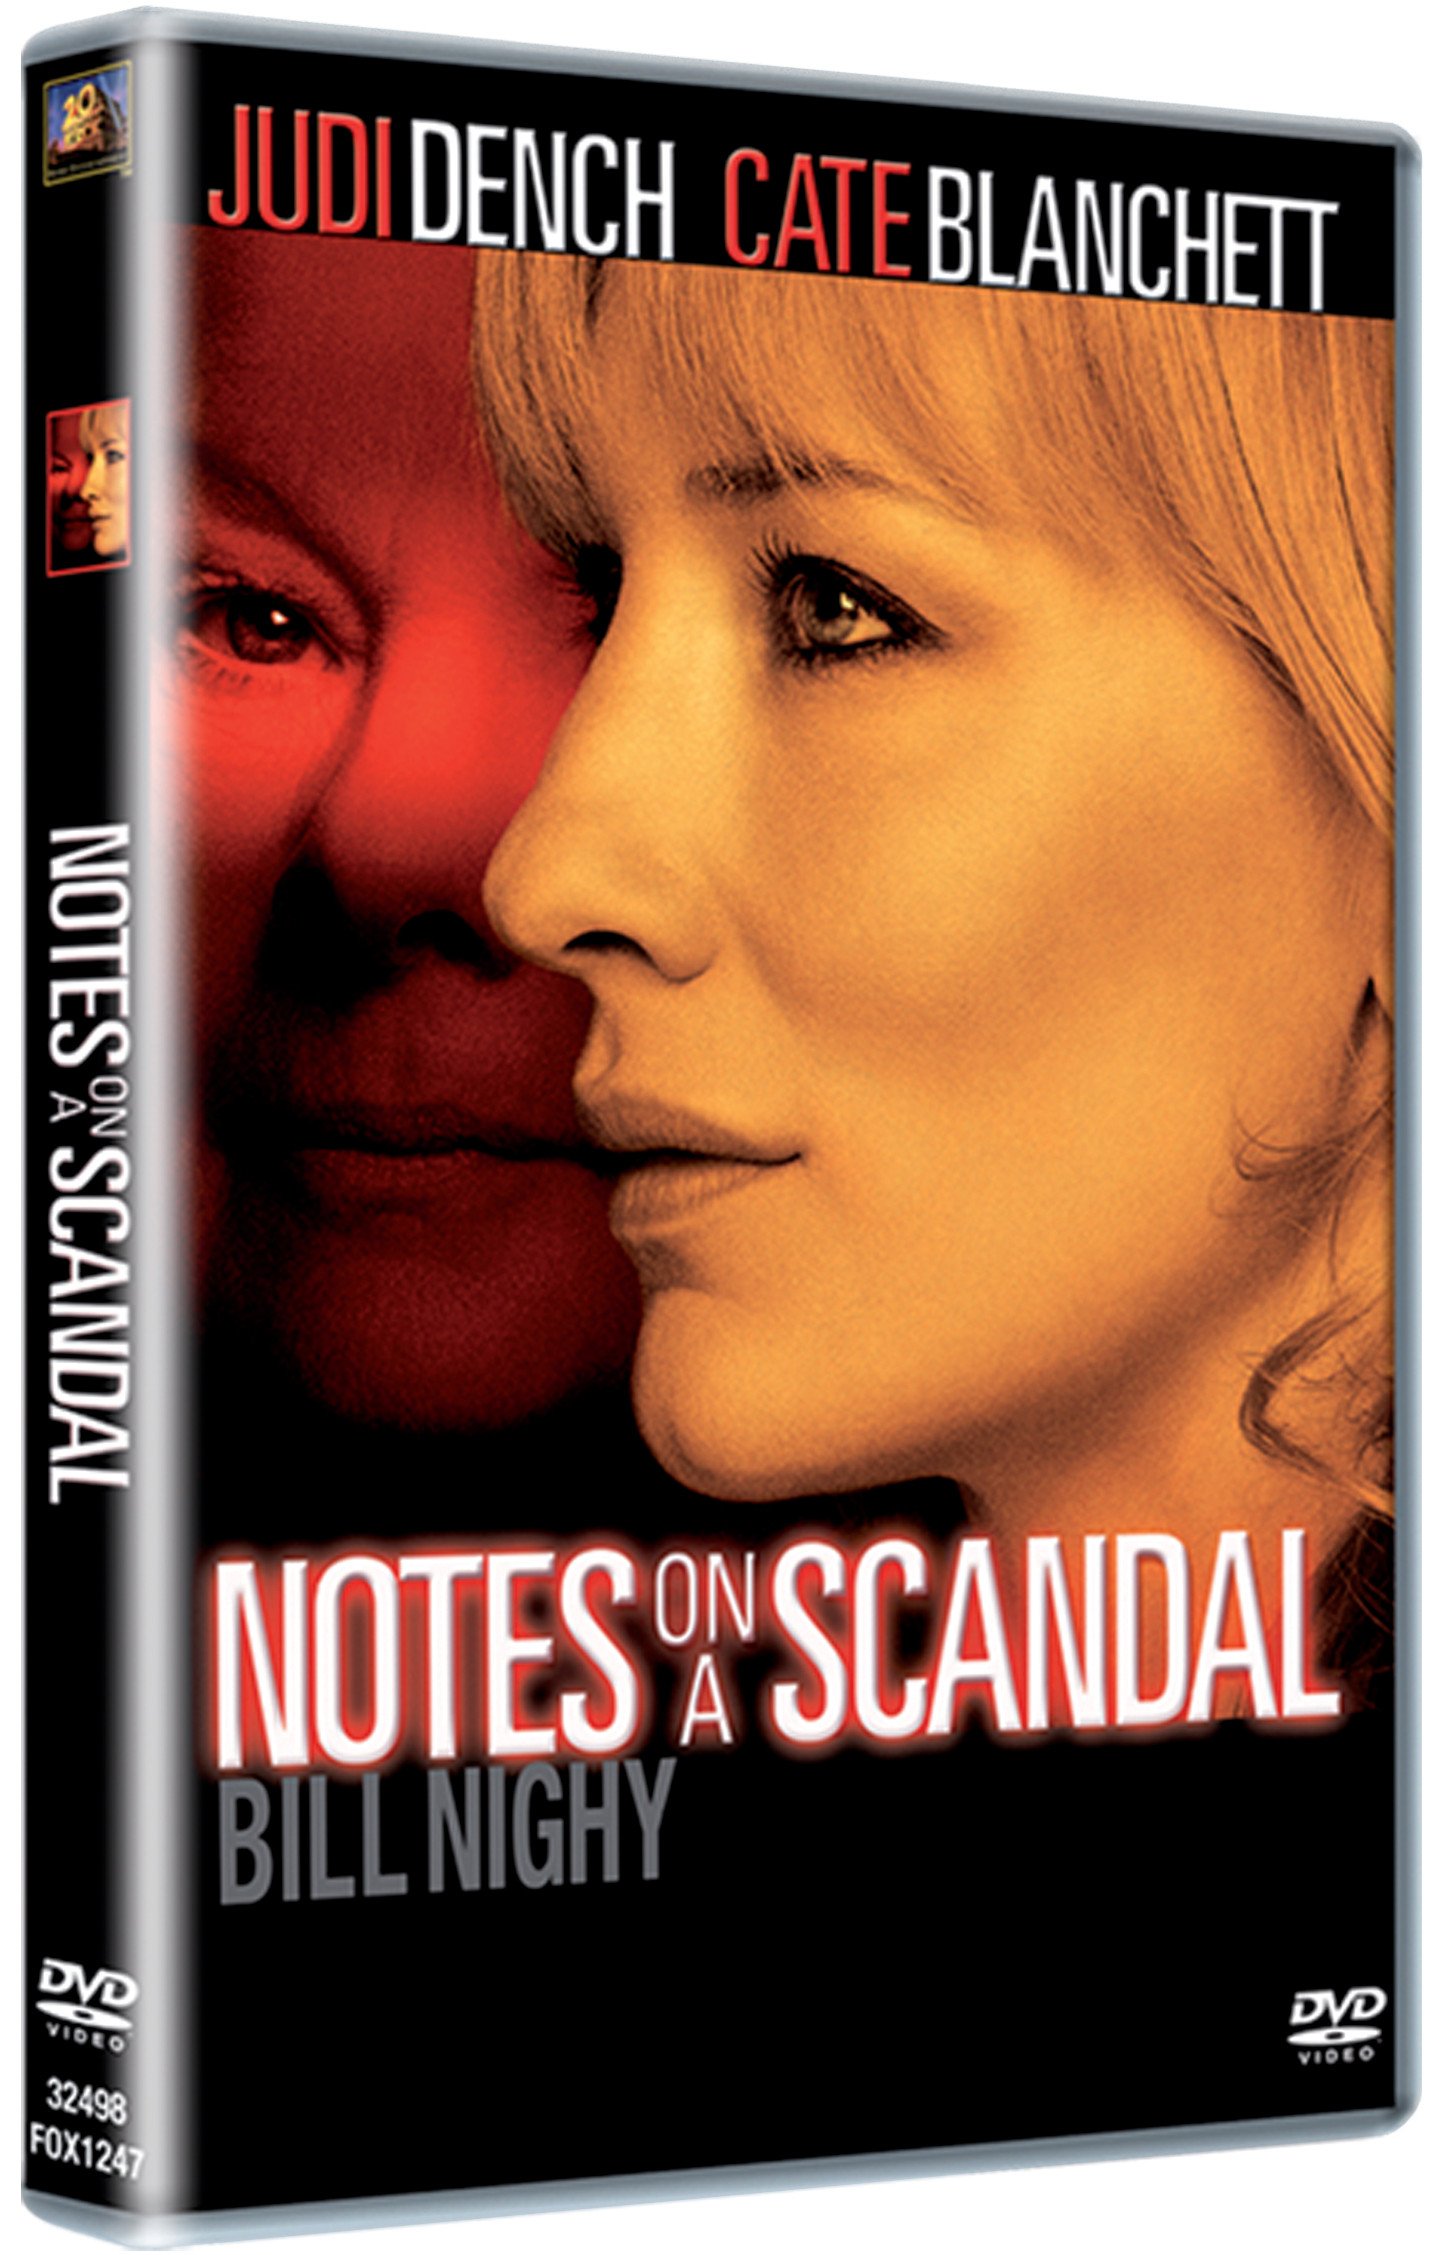 notes-on-a-scandal-movie-purchase-or-watch-online